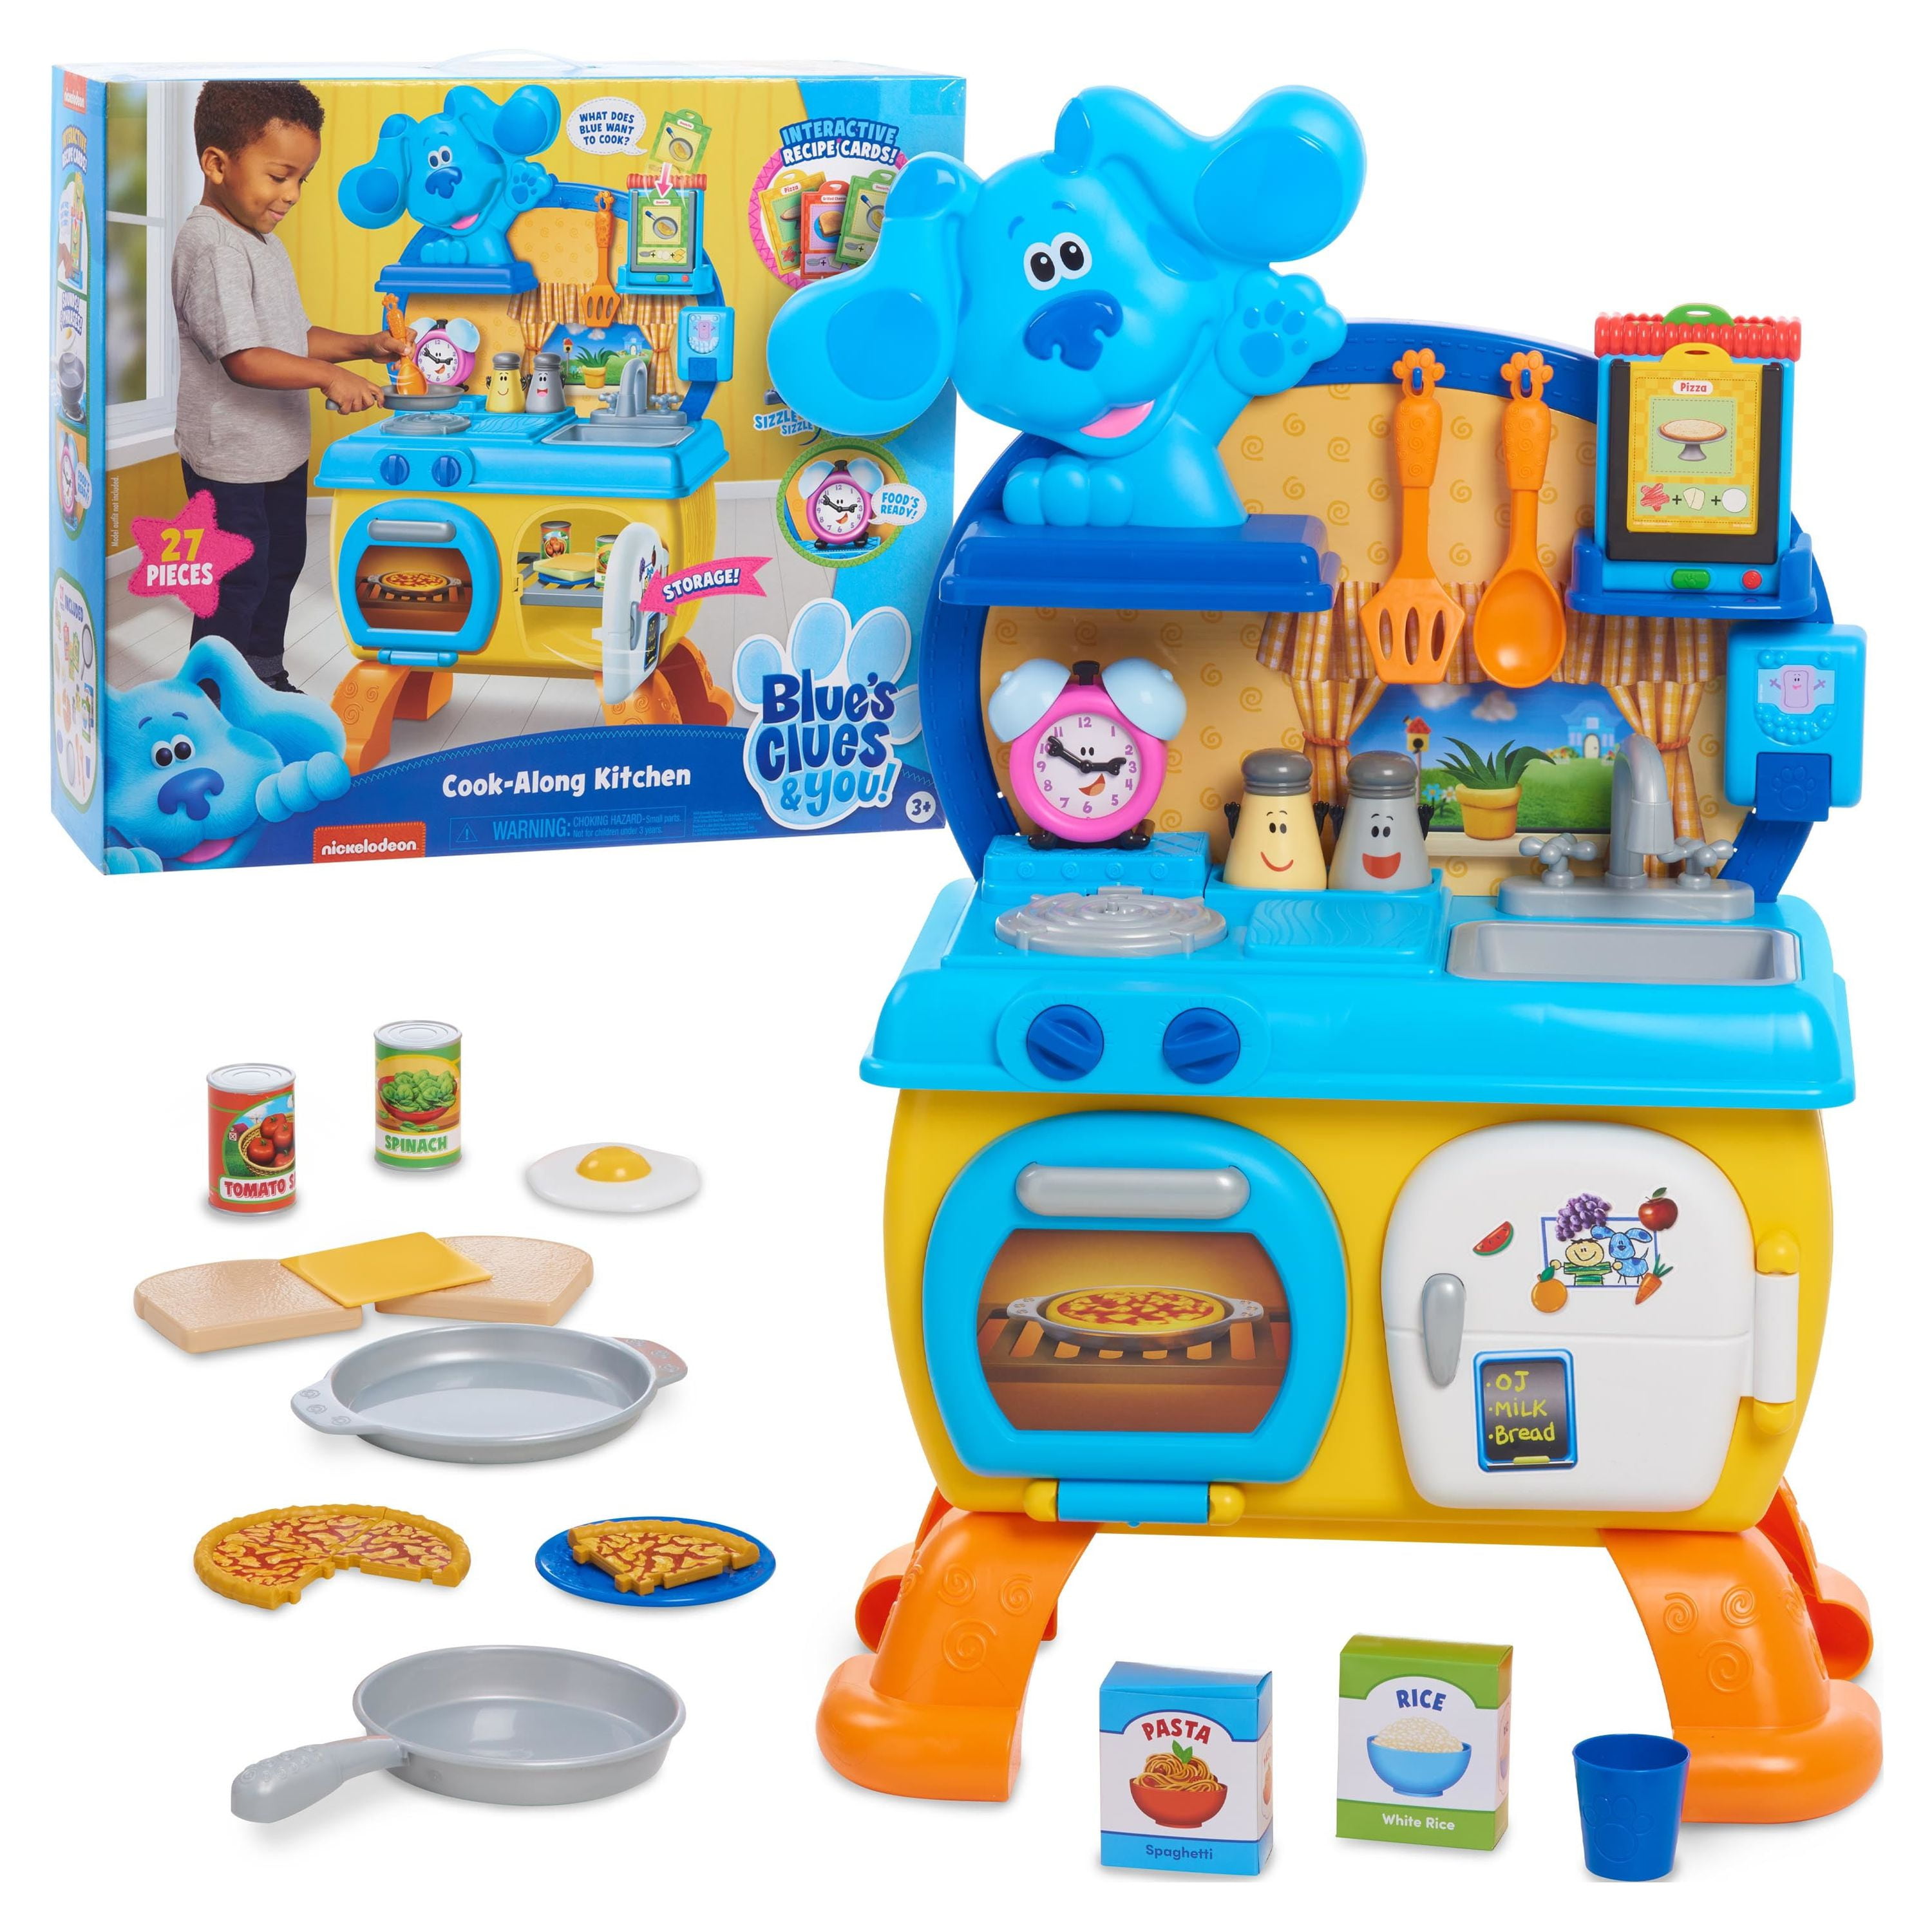 Link Little Chef Mini Kitchen Playset with Sound and Color Changing Lights for Realistic Cooking